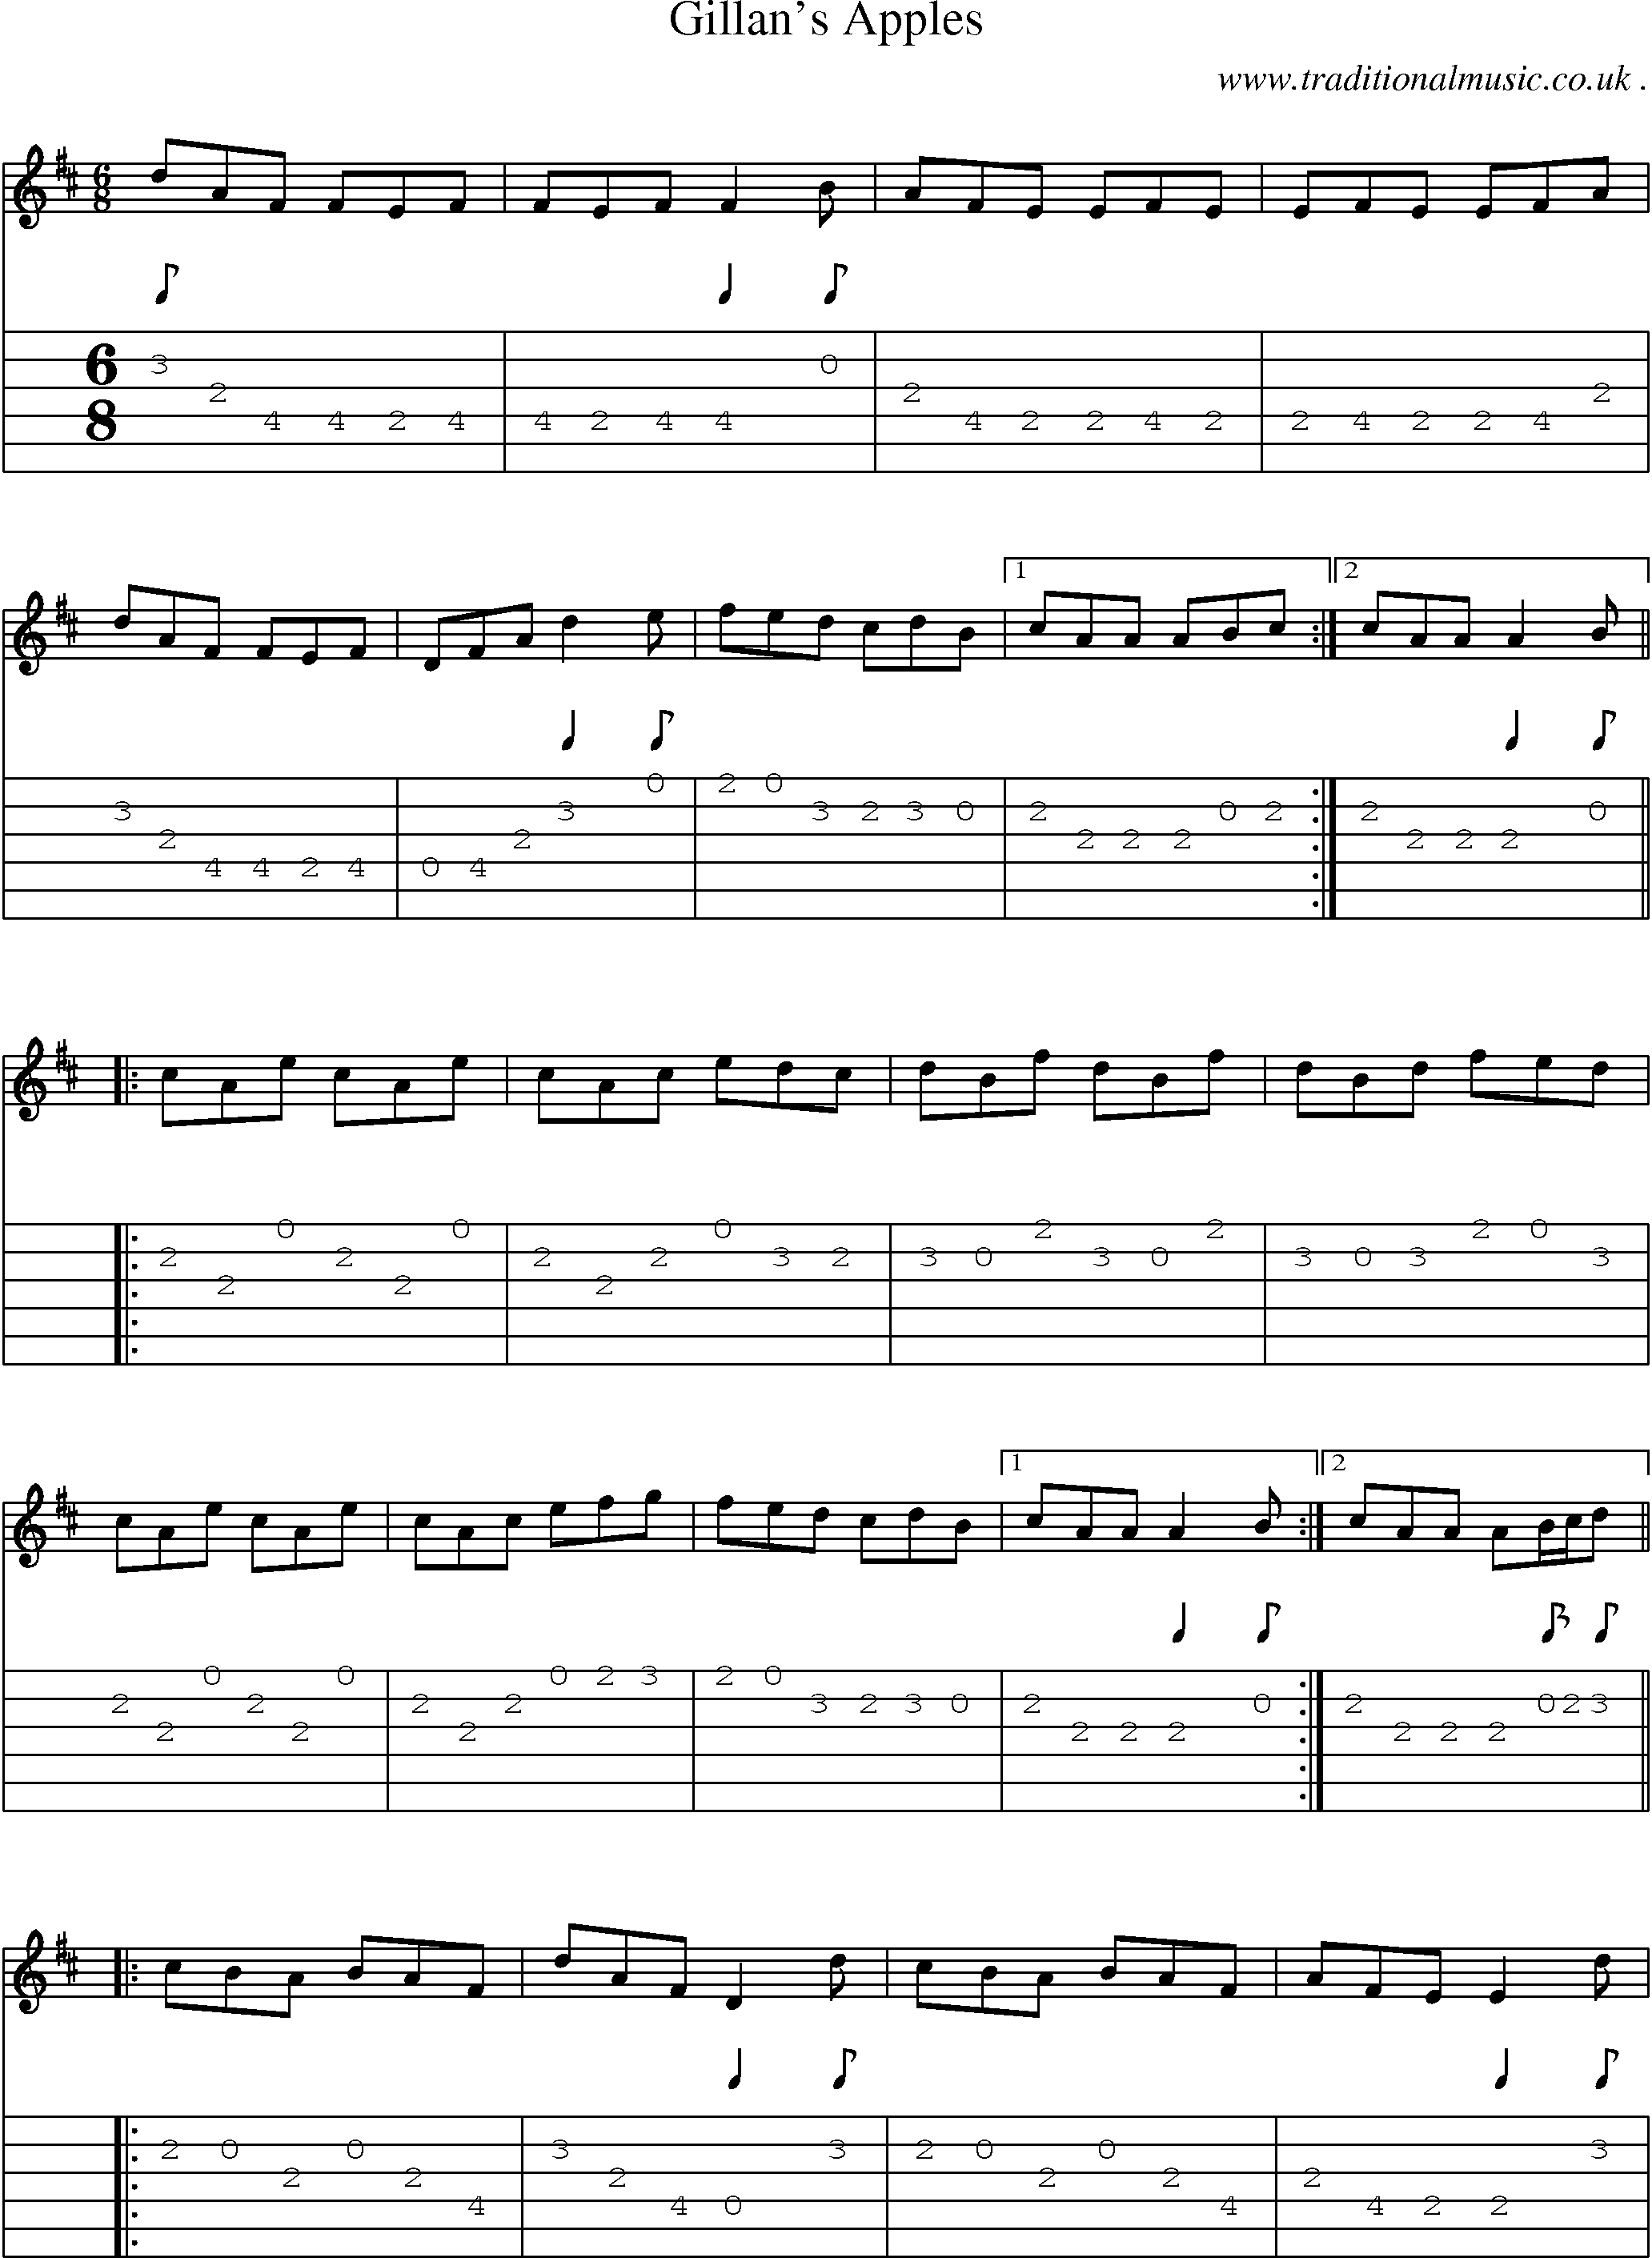 Sheet-Music and Guitar Tabs for Gillans Apples